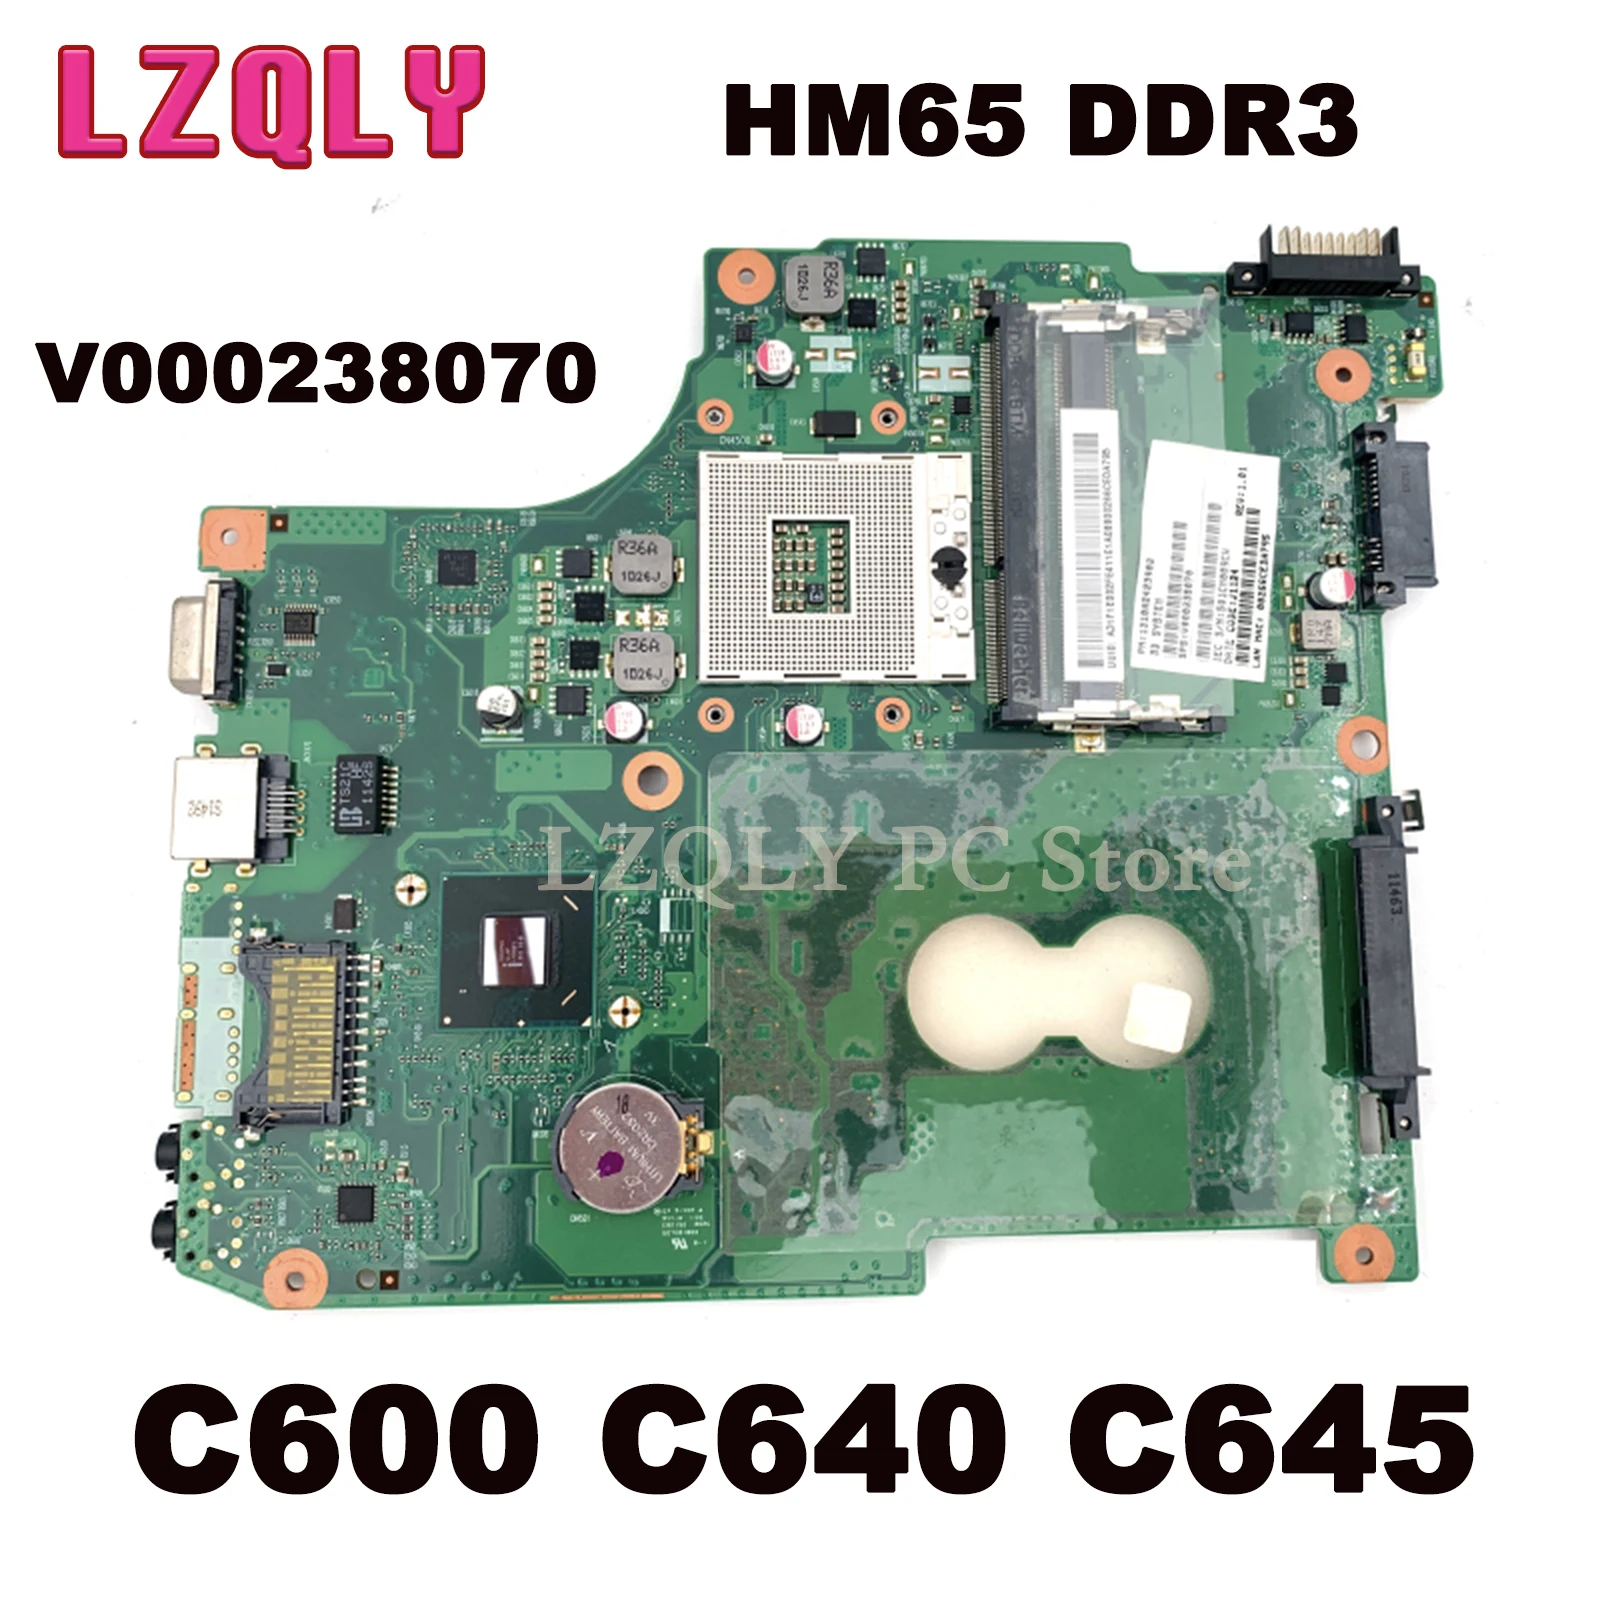 LZQLY V000238070 for Toshiba Satellite C600 C640 C645 laptop motherboard 6050A2423901 HM65 DDR3 main board full test